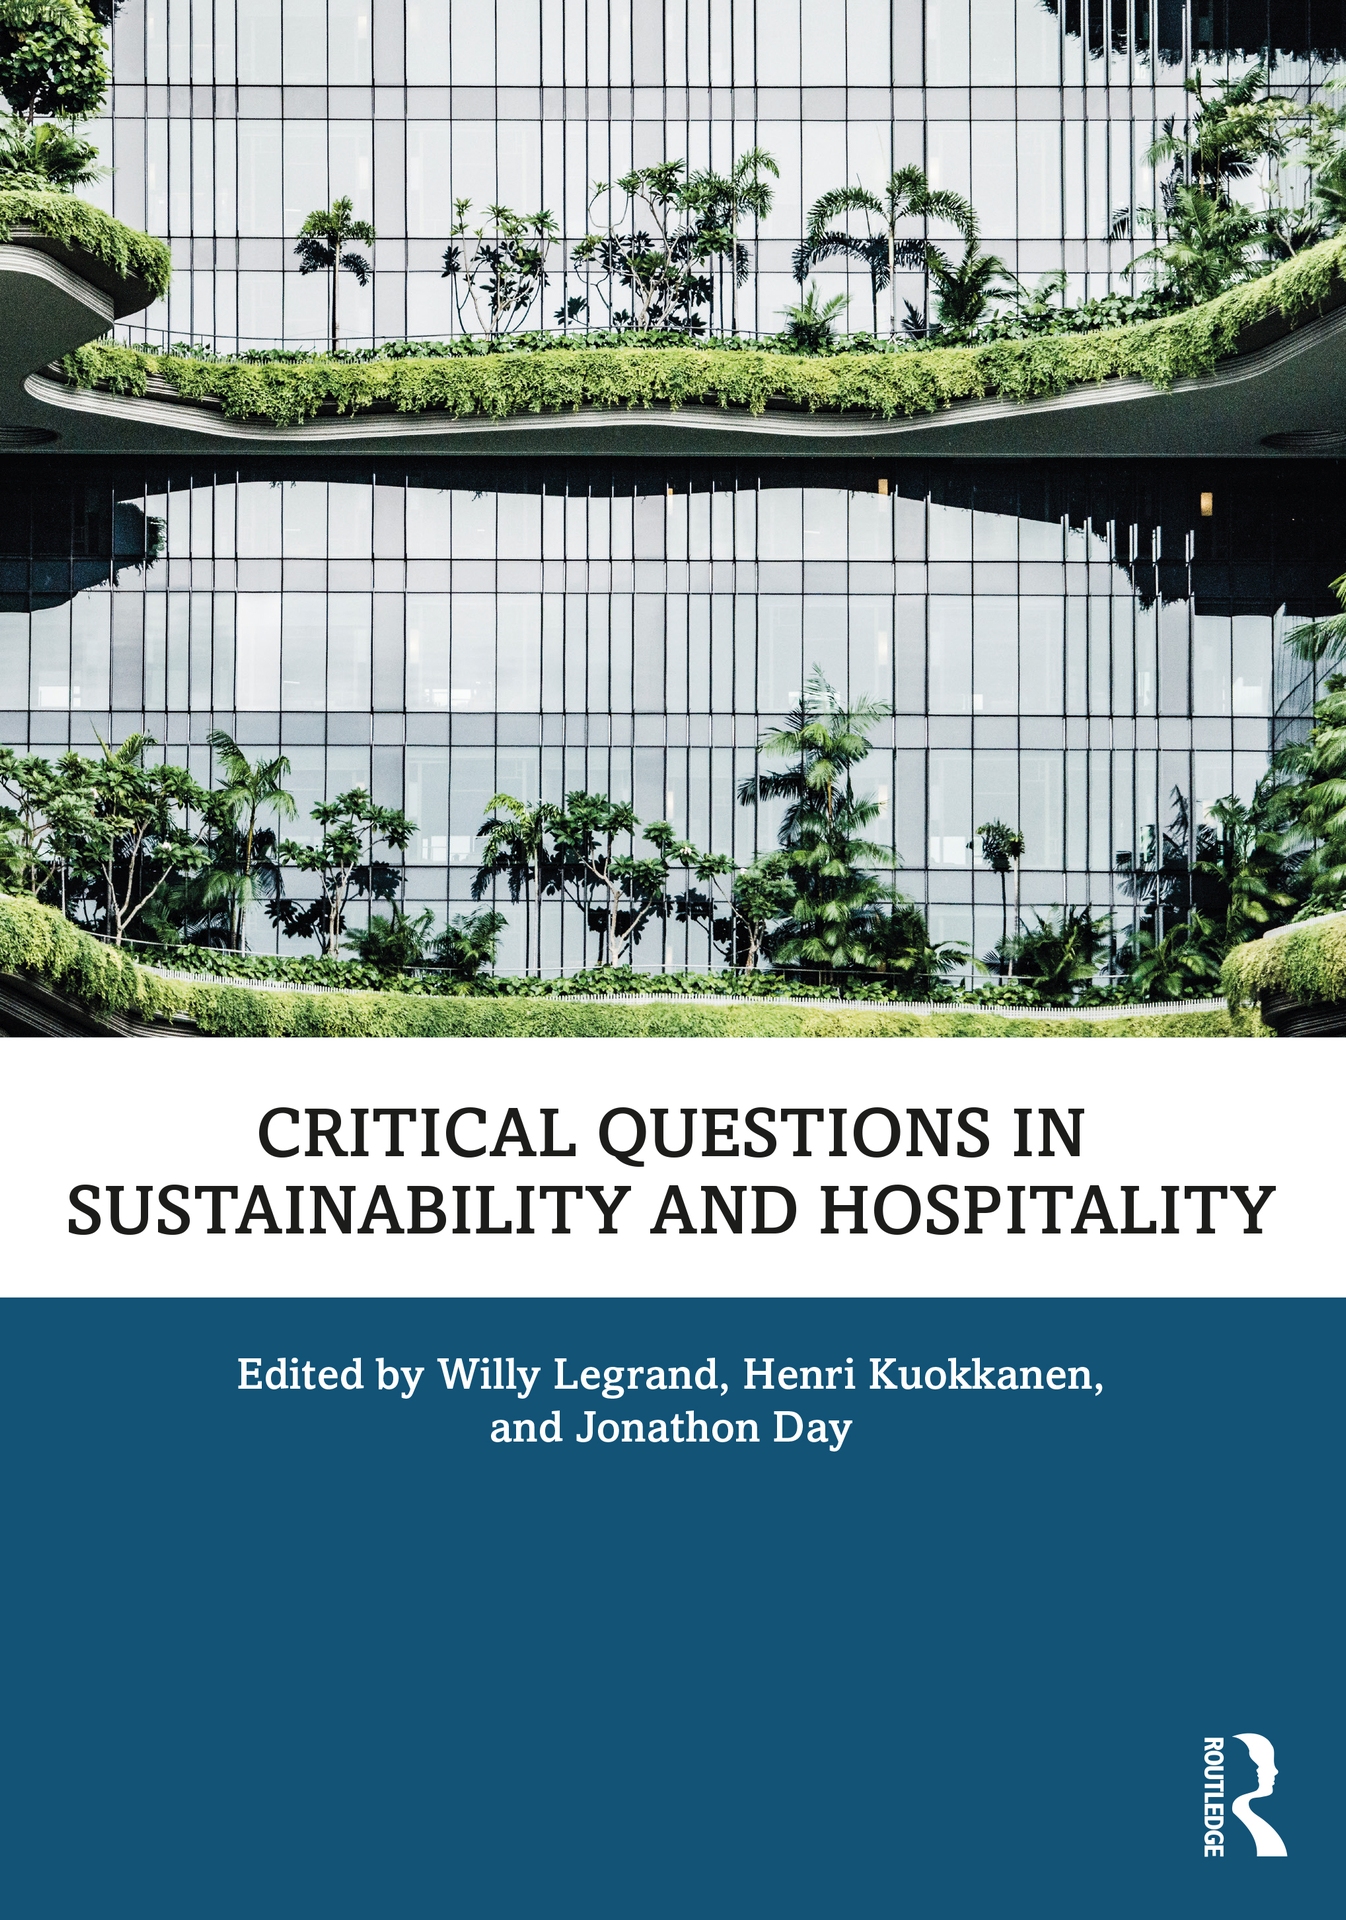 Book Cover "Critical Questions in Sustainability and Hospitality"